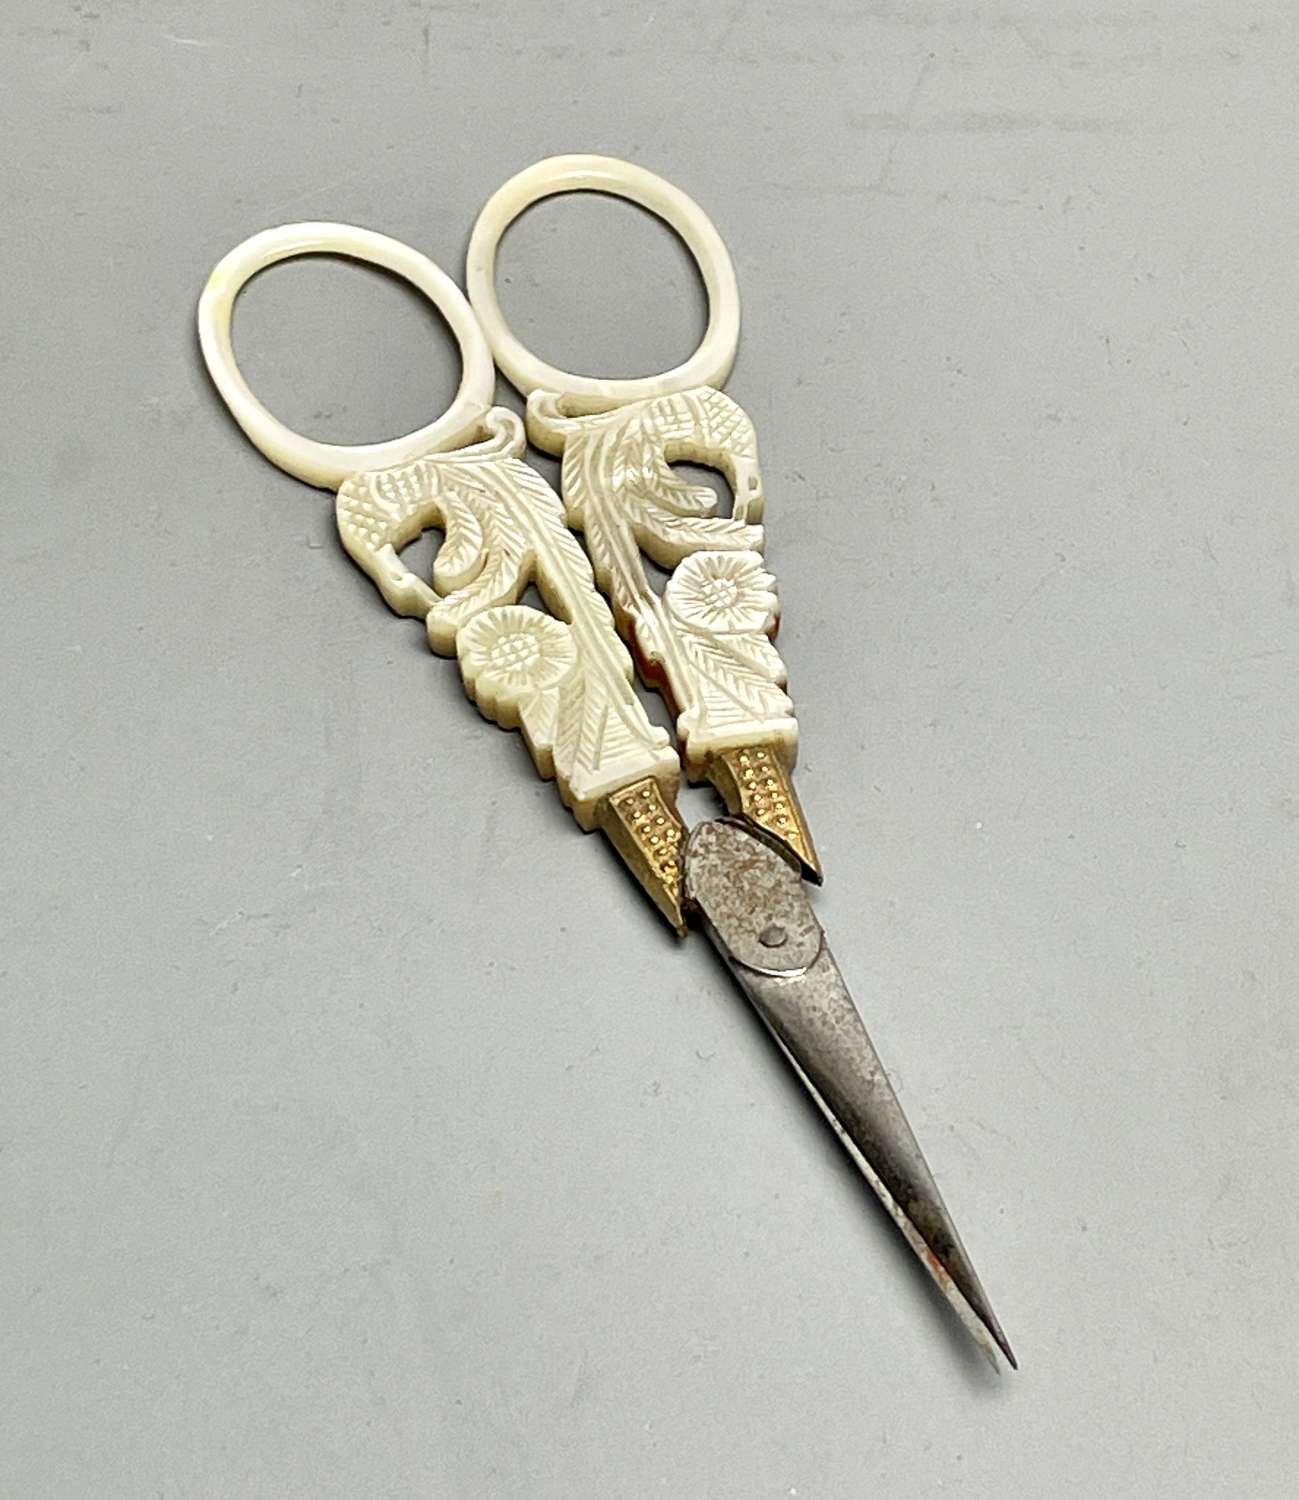 Palais Royale Mother of Pearl Handled Needlework Scissors